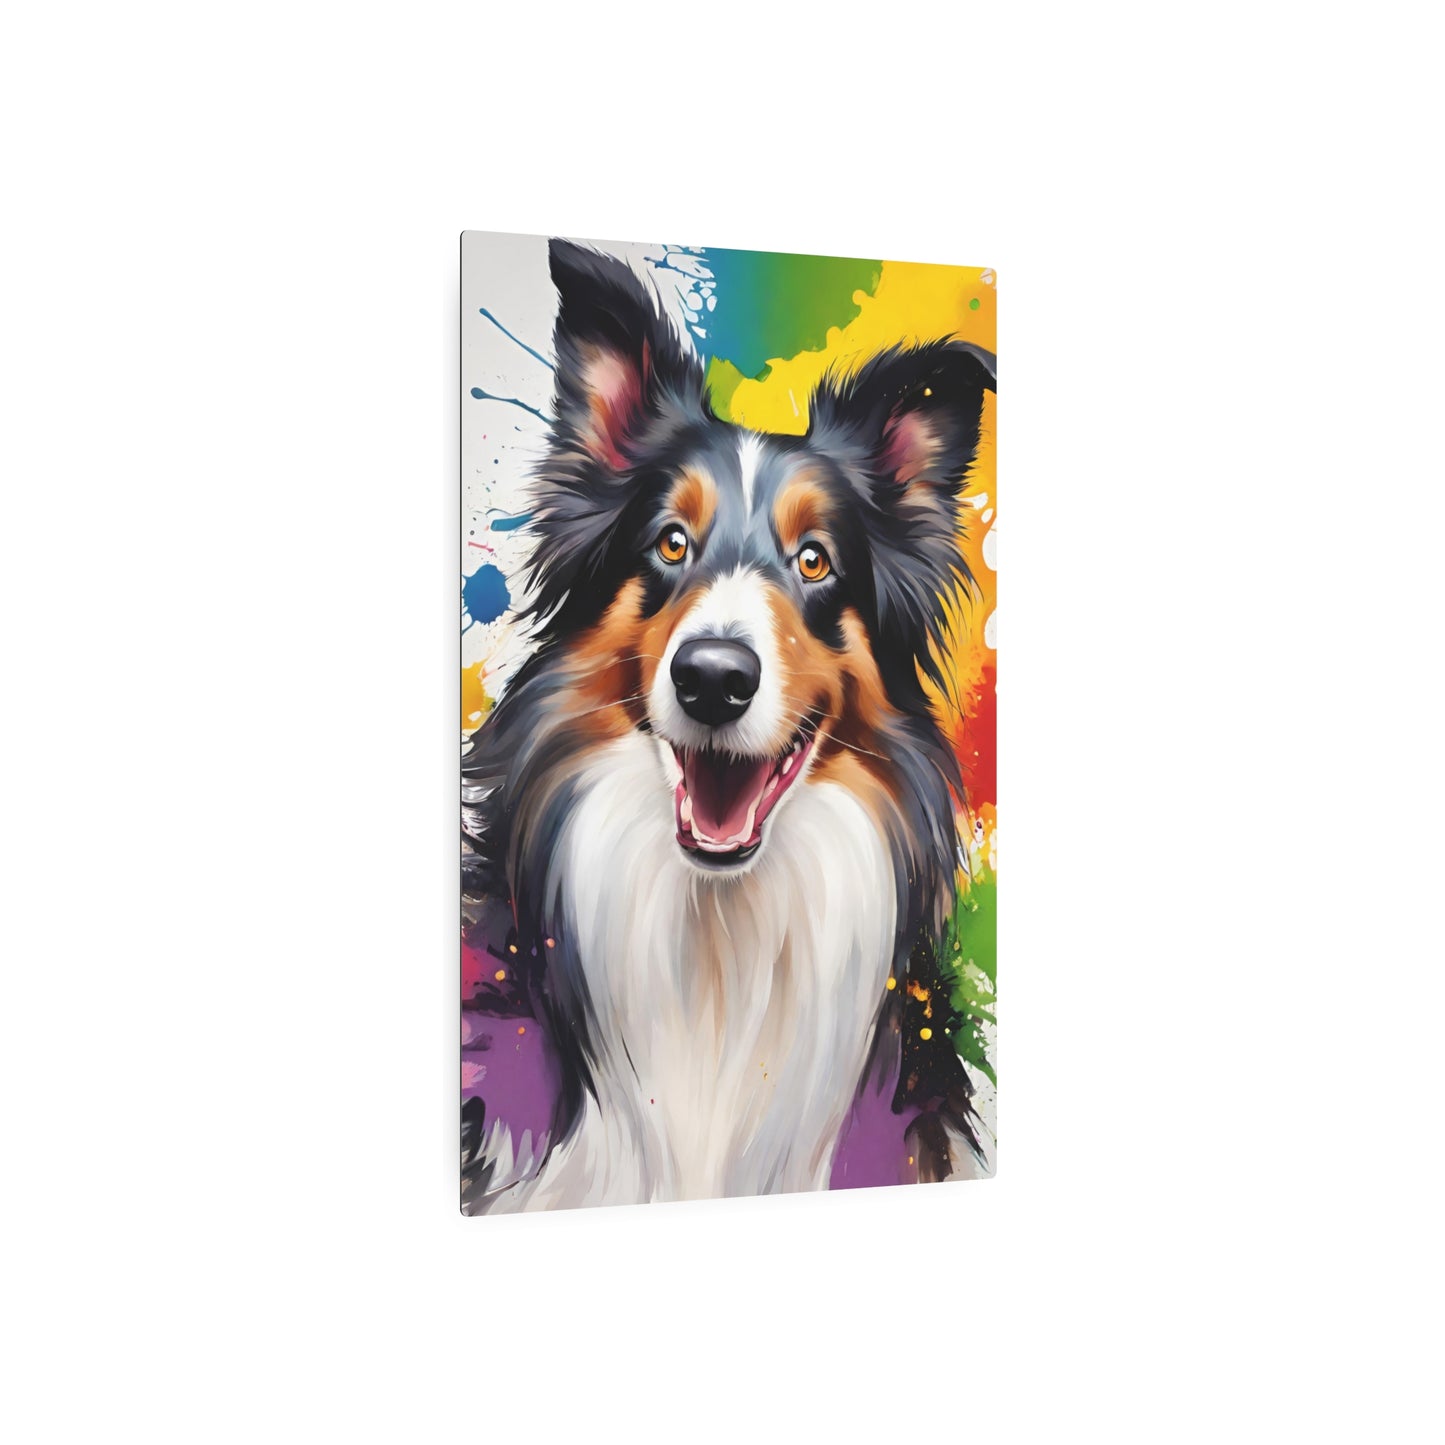 Metal Wall Art Decor featuring a Colorful Collie Dog. Mounting tools included. Versatile Home Decor.